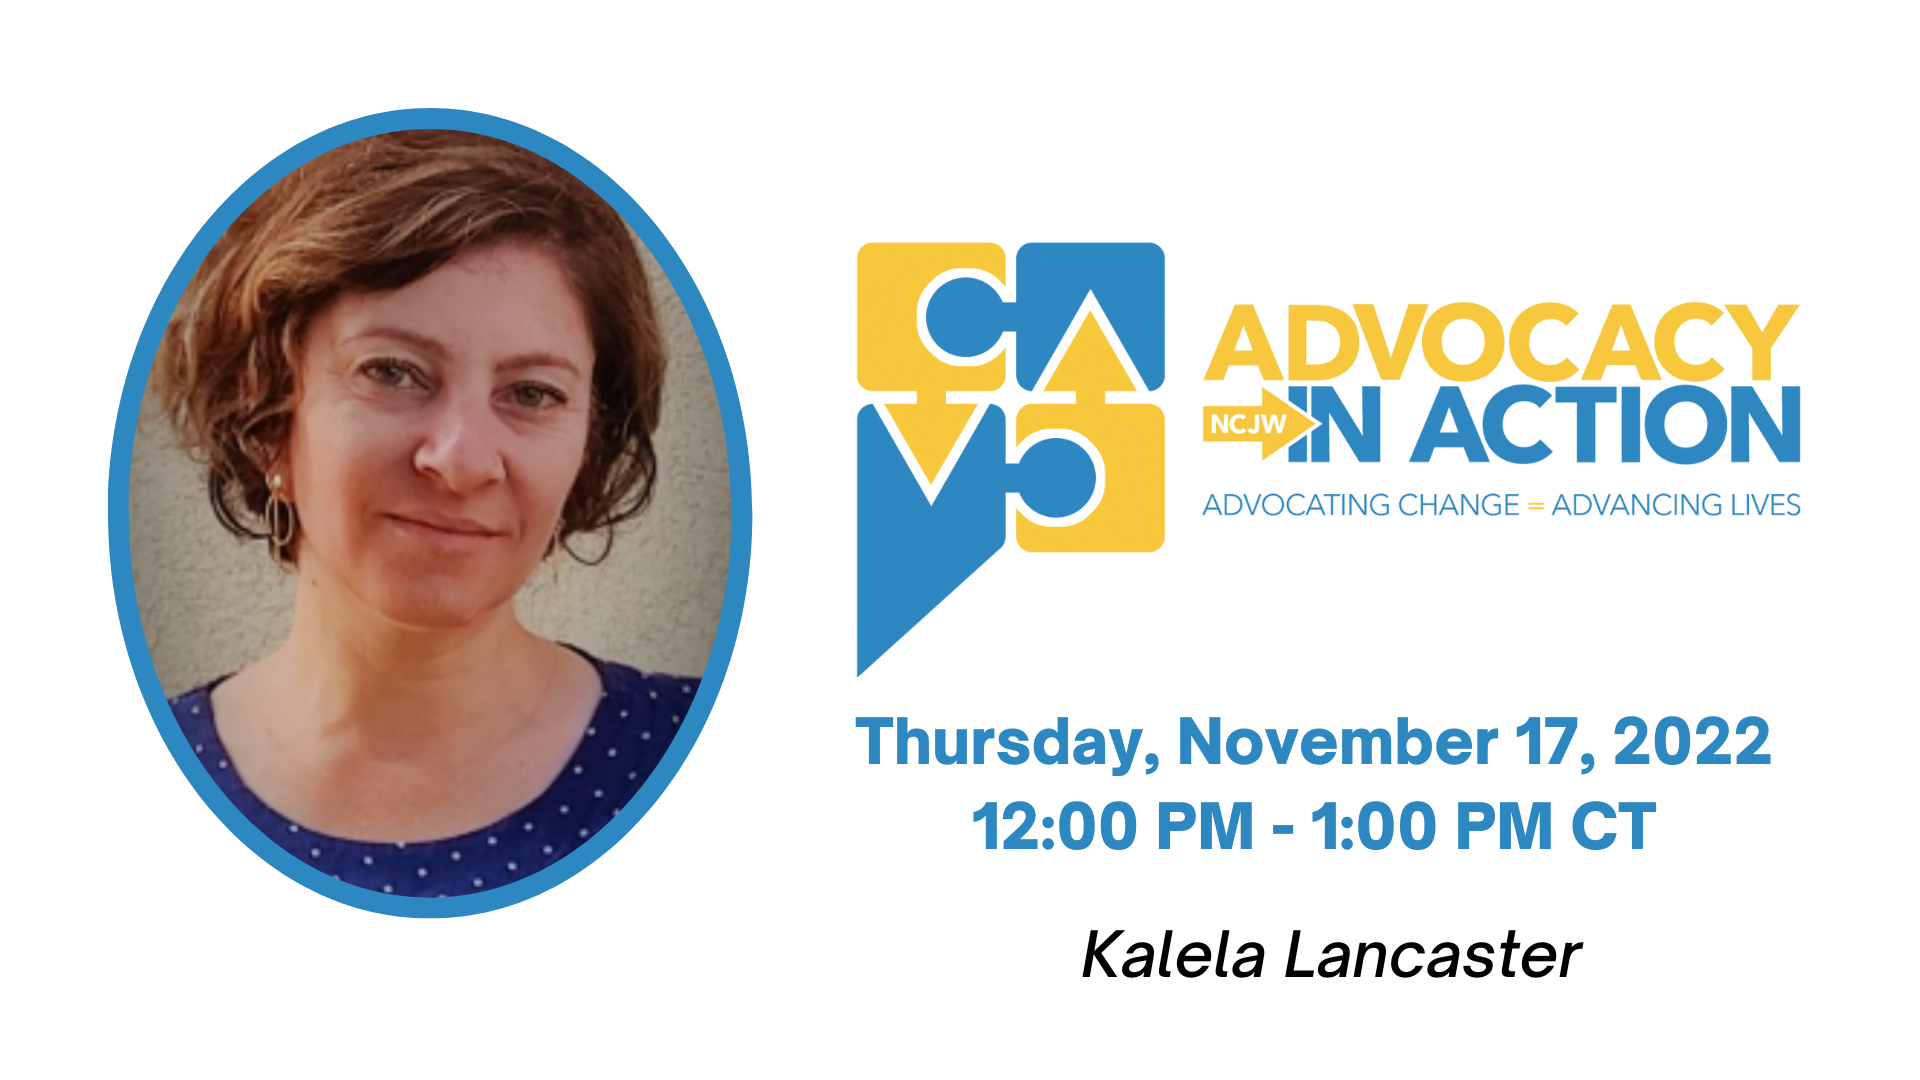 Advocacy in Action: Lunch & Learn